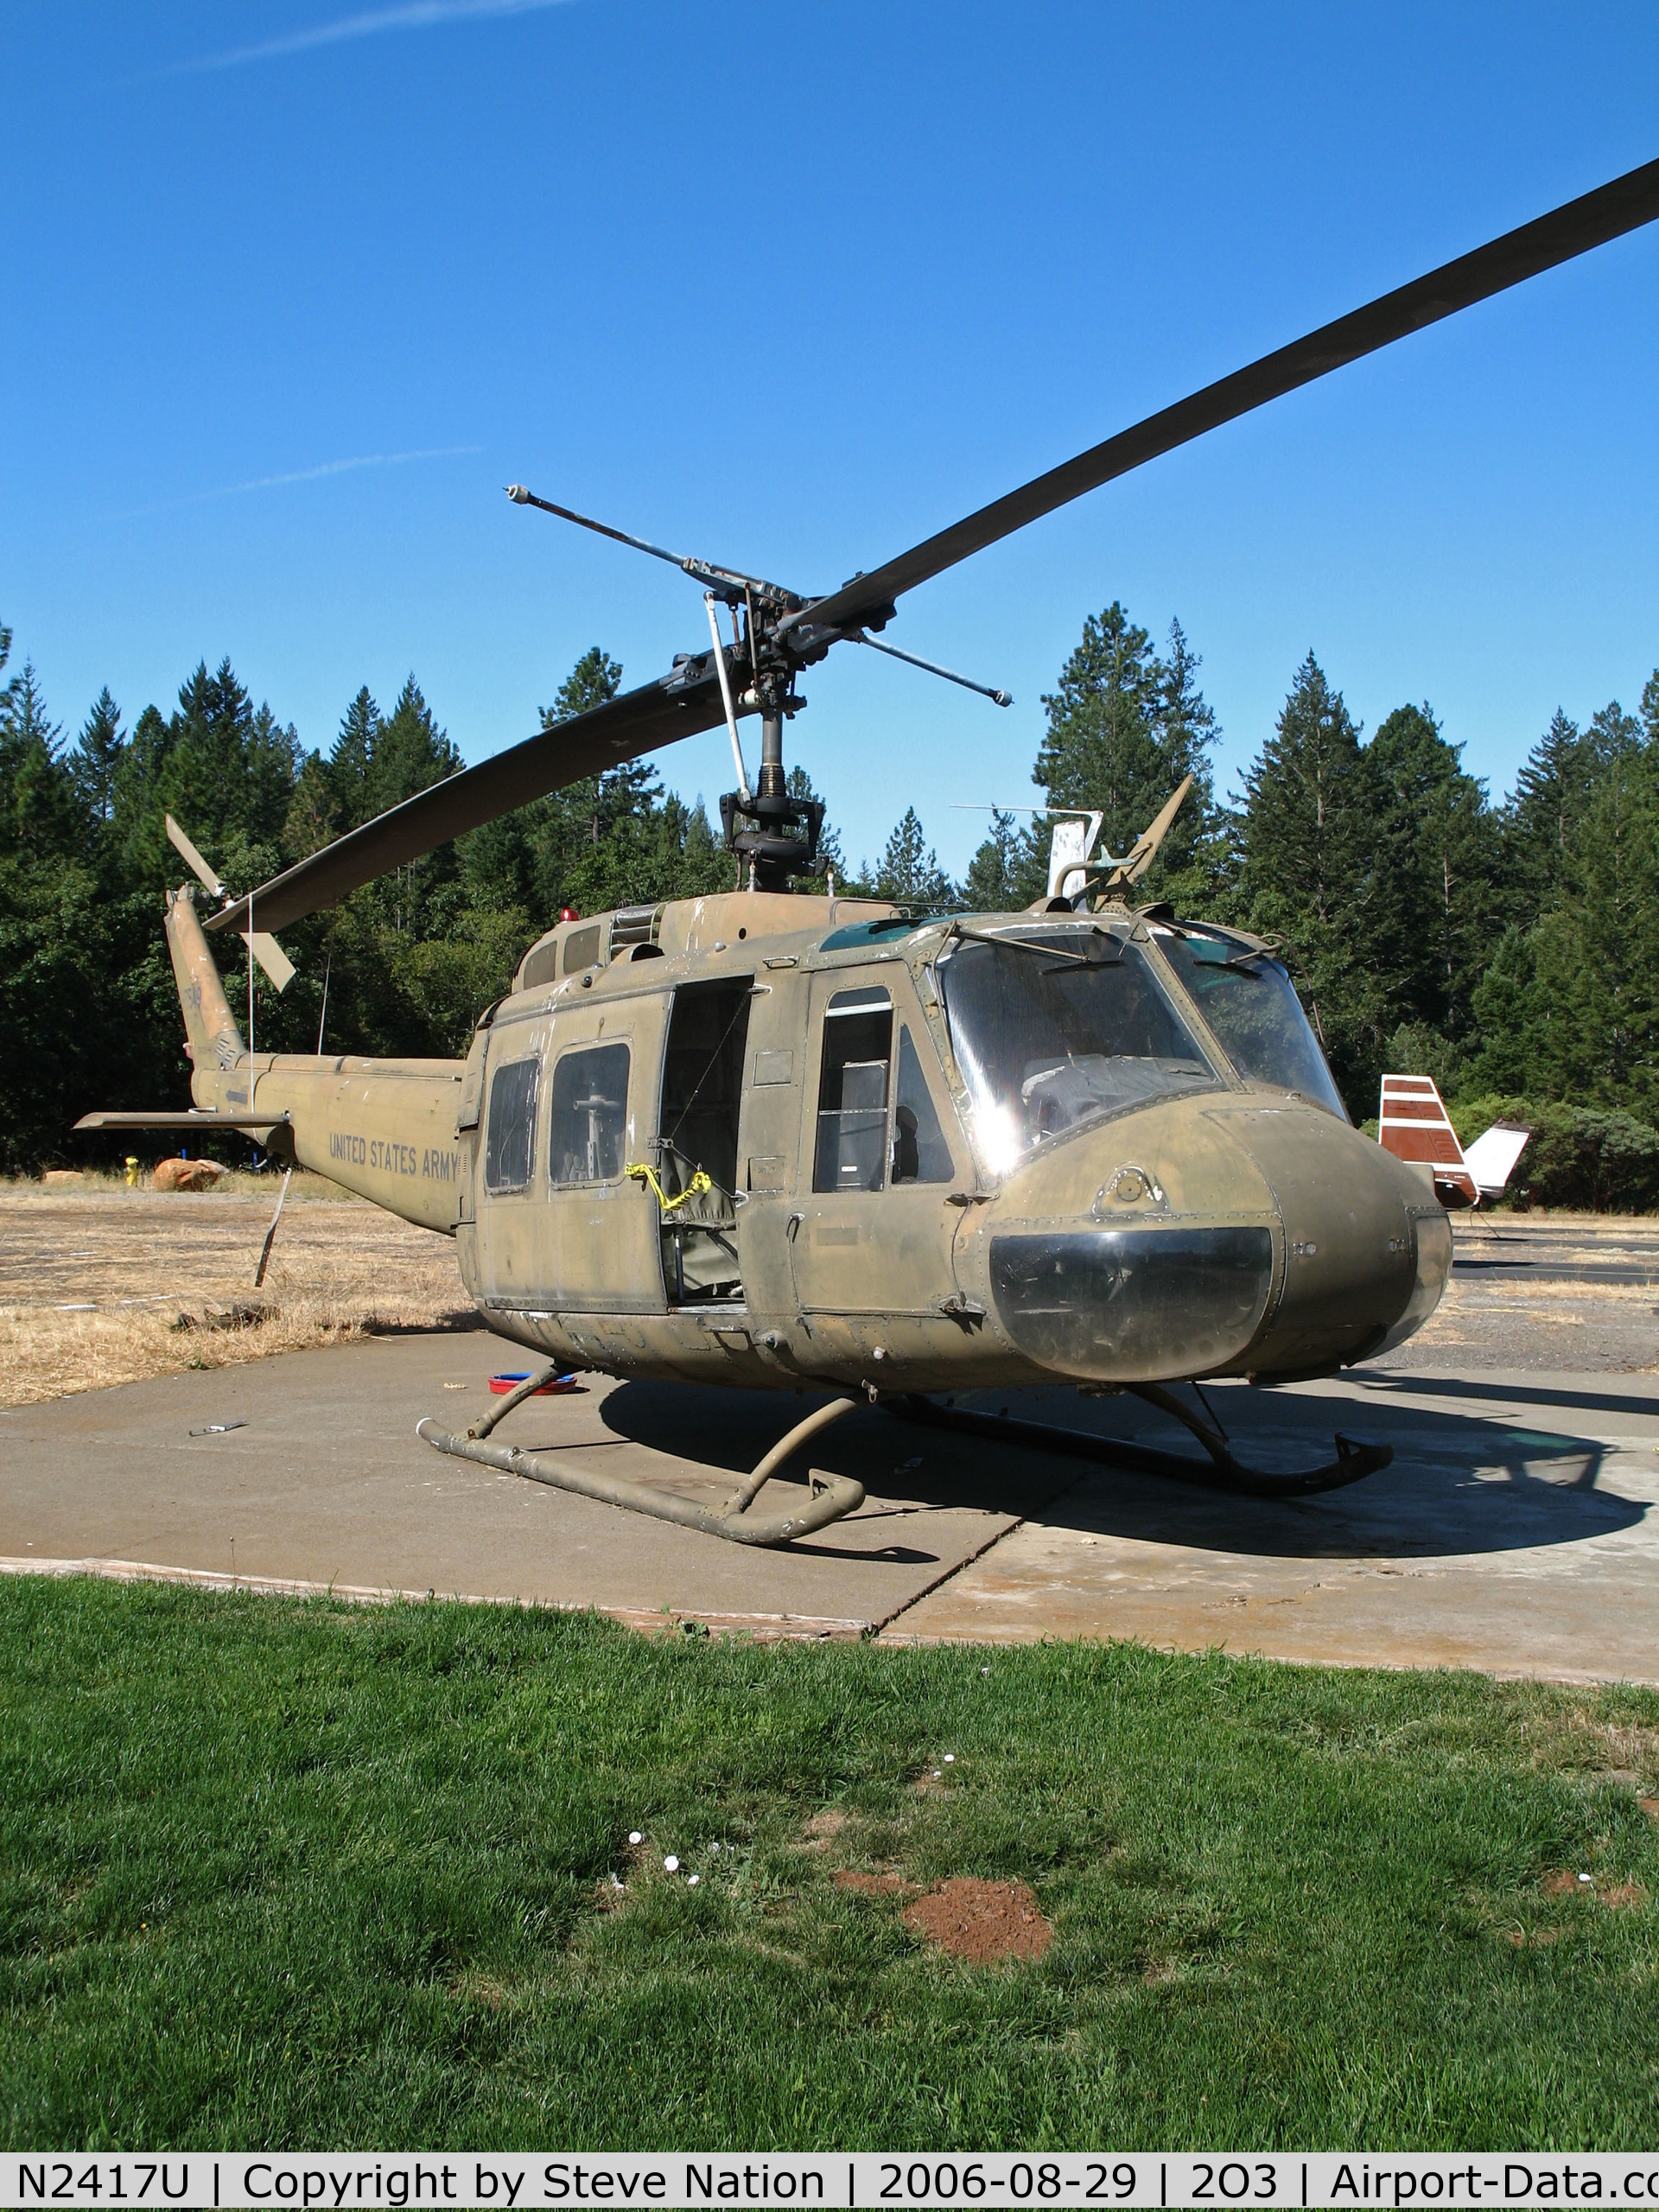 N2417U, Bell UH-1H Iroquois C/N 017549, Pacific Union College has this static Bell UH-1H ex 0-17549 USAR as part of their aviation program (doesn't carry its civilian registration) @ Parrett Field, Angwin, CA